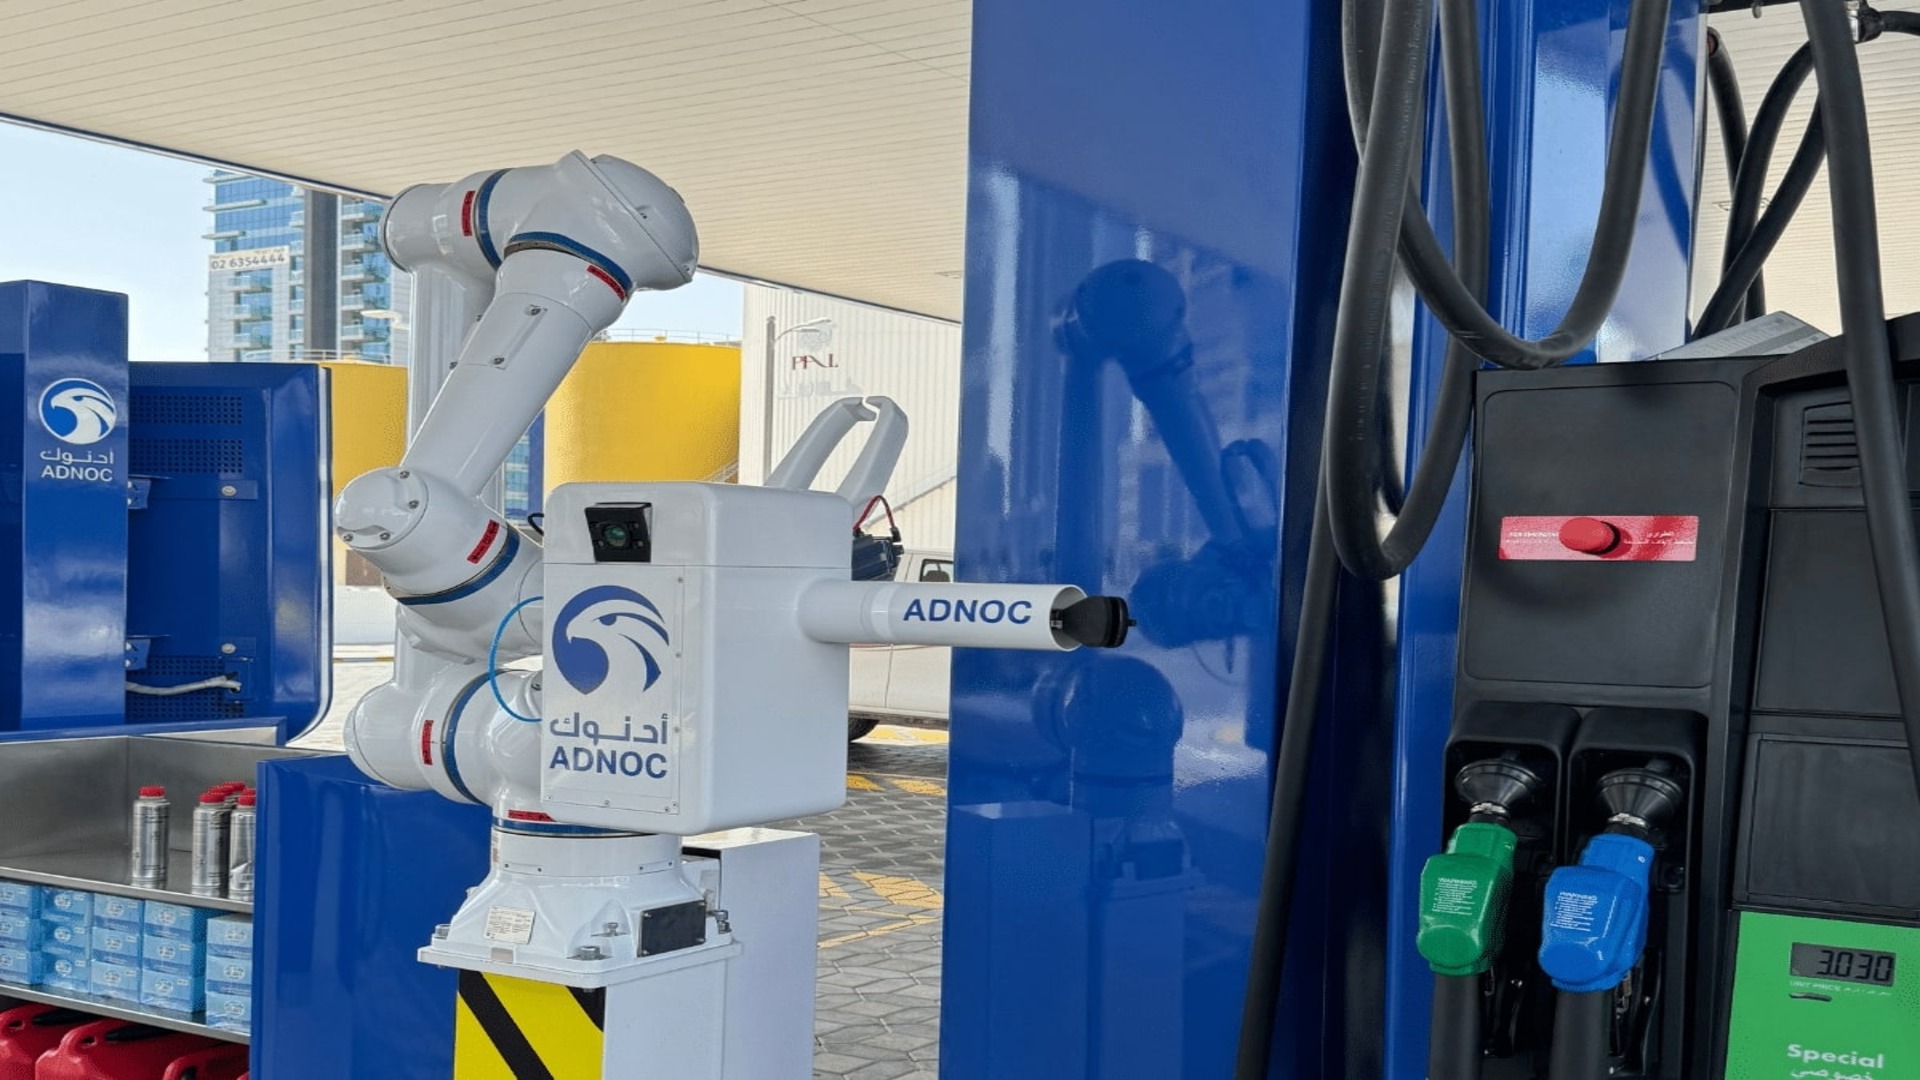 The robotic arm takes over UAE gas stations [Video]